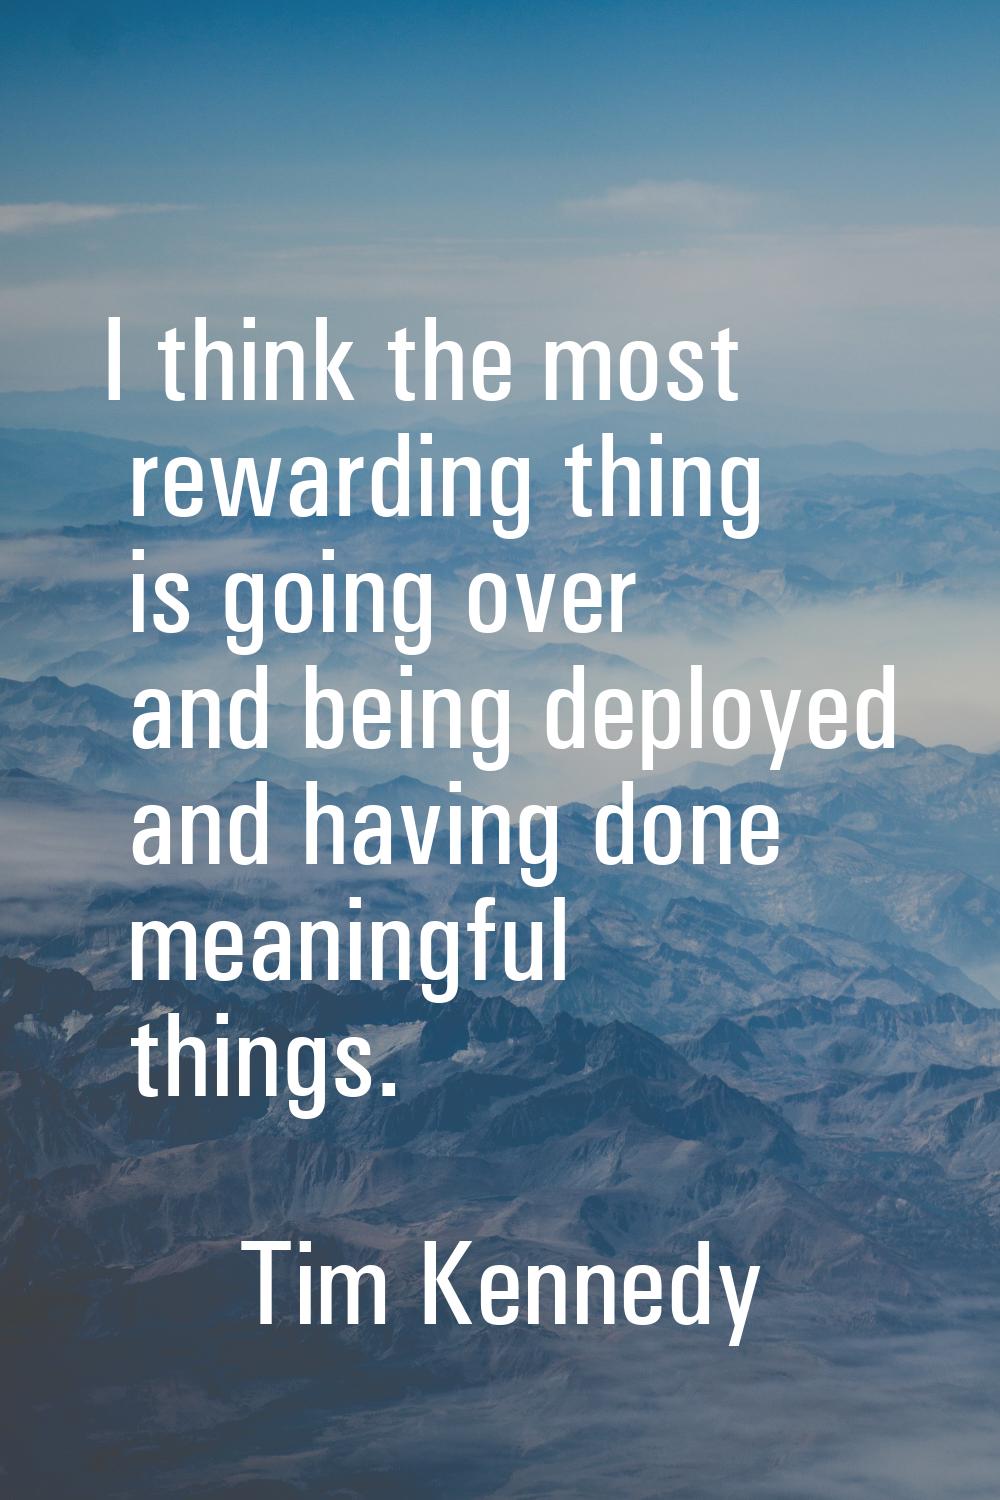 I think the most rewarding thing is going over and being deployed and having done meaningful things